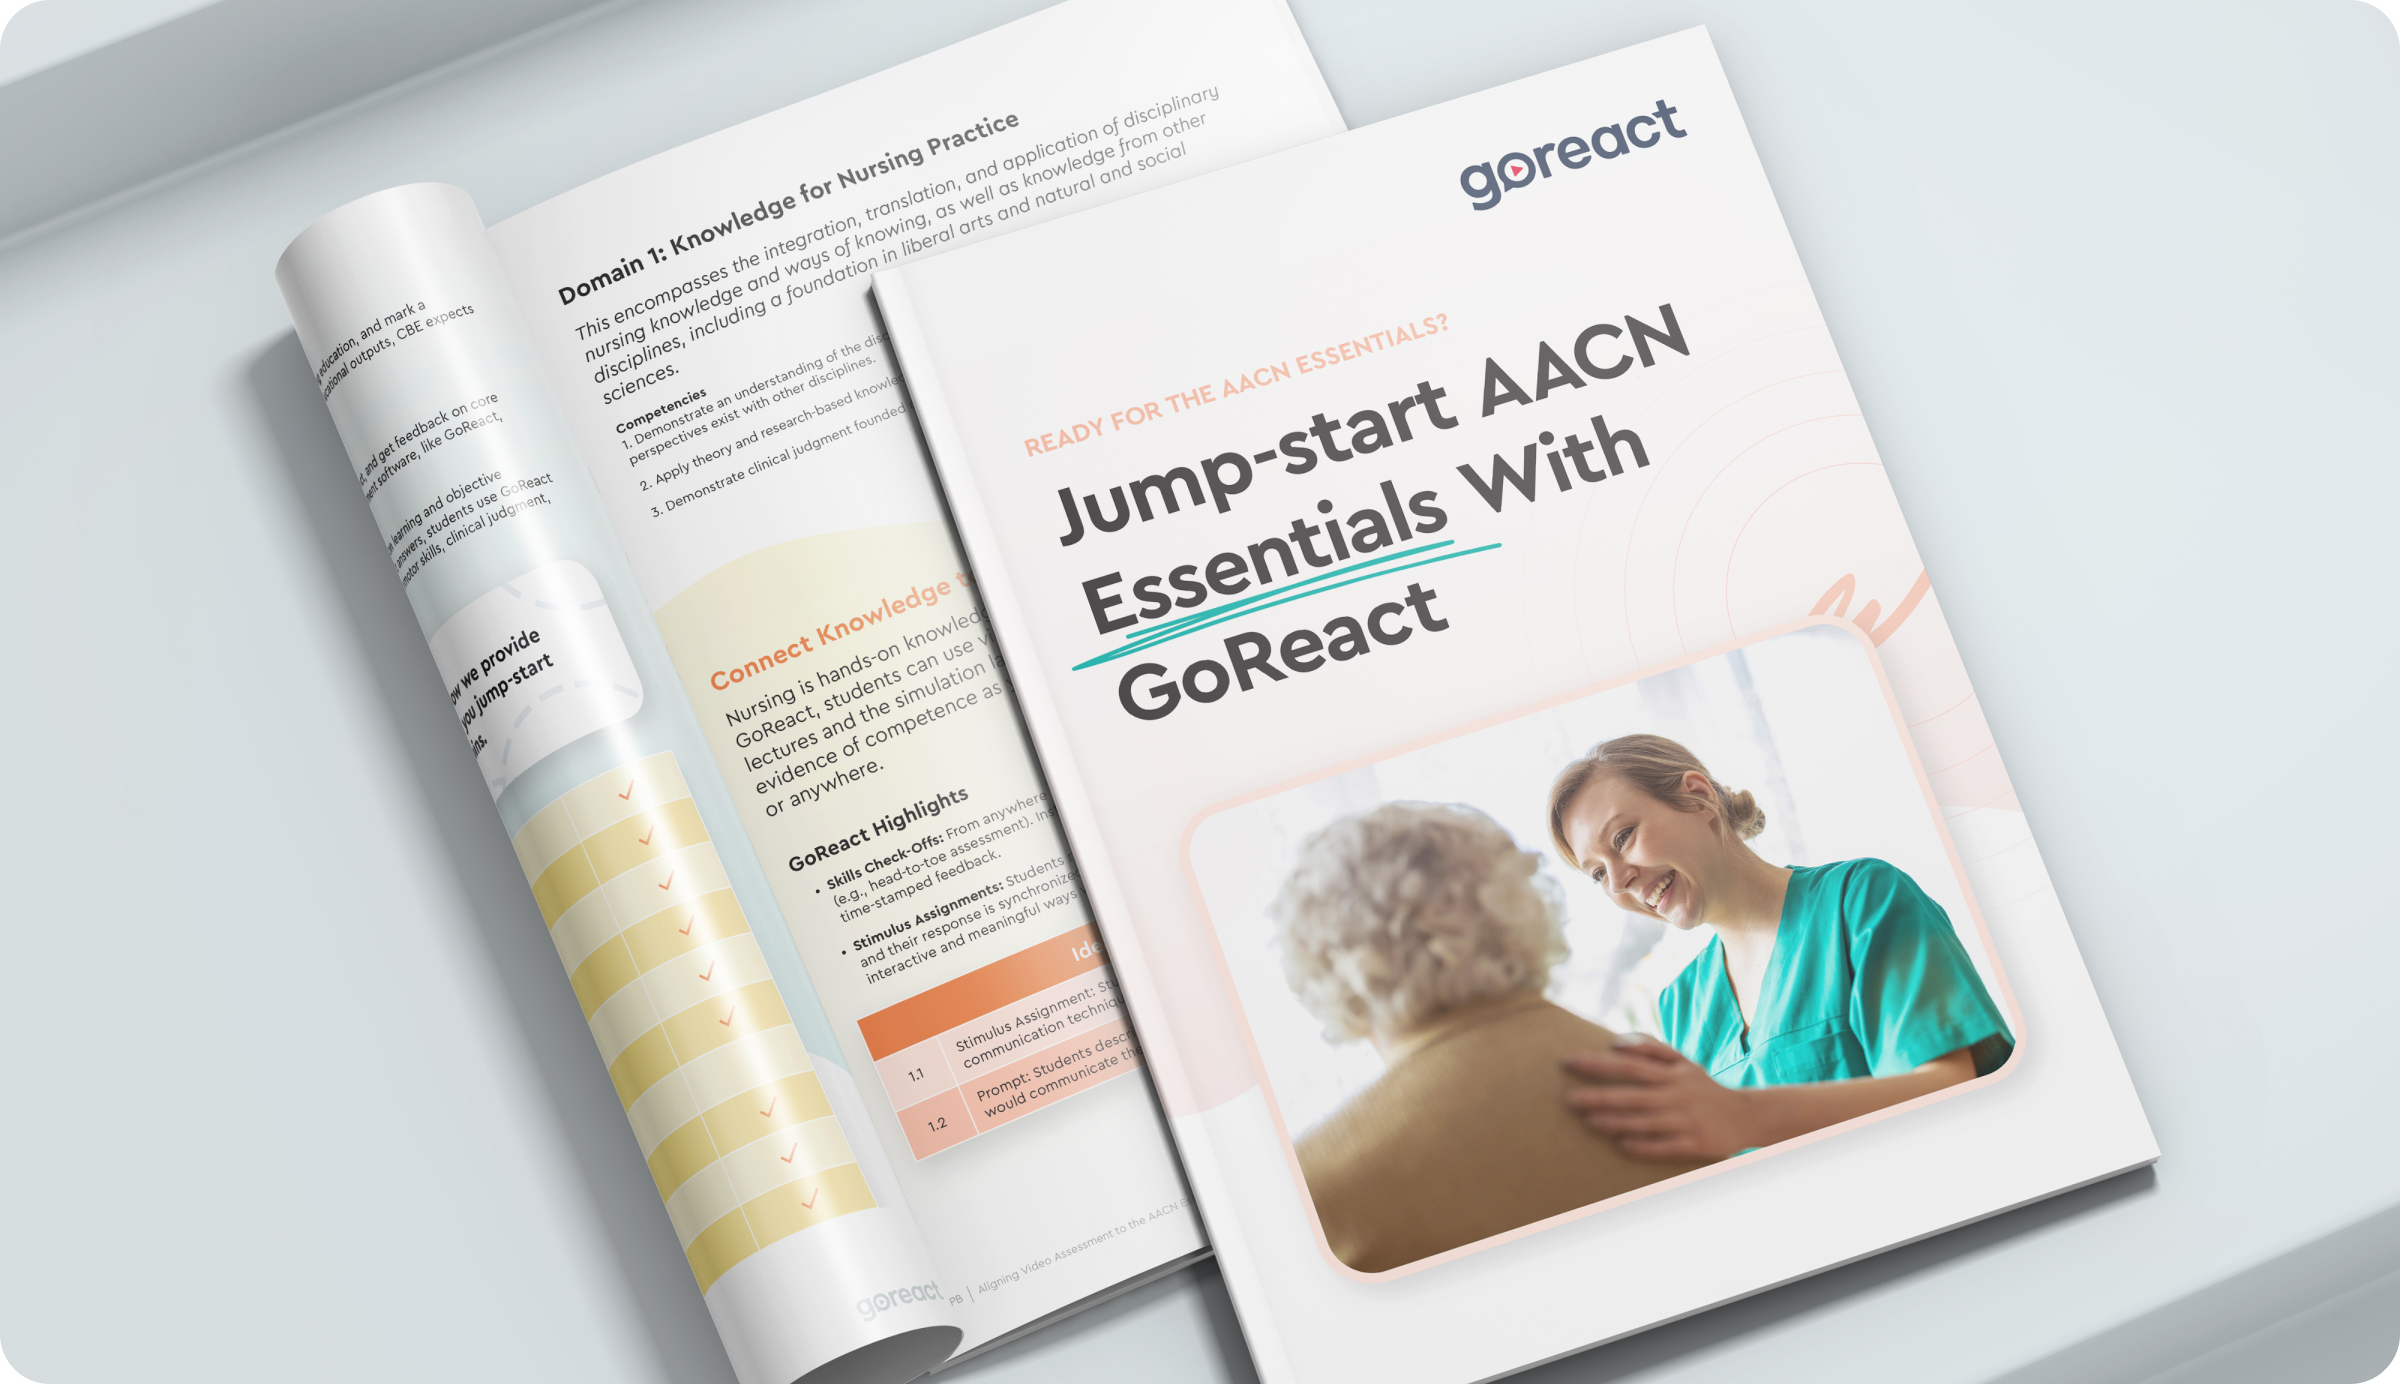 Update Your Curriculum to Support Competency-Based Education & the New AACN Essentials